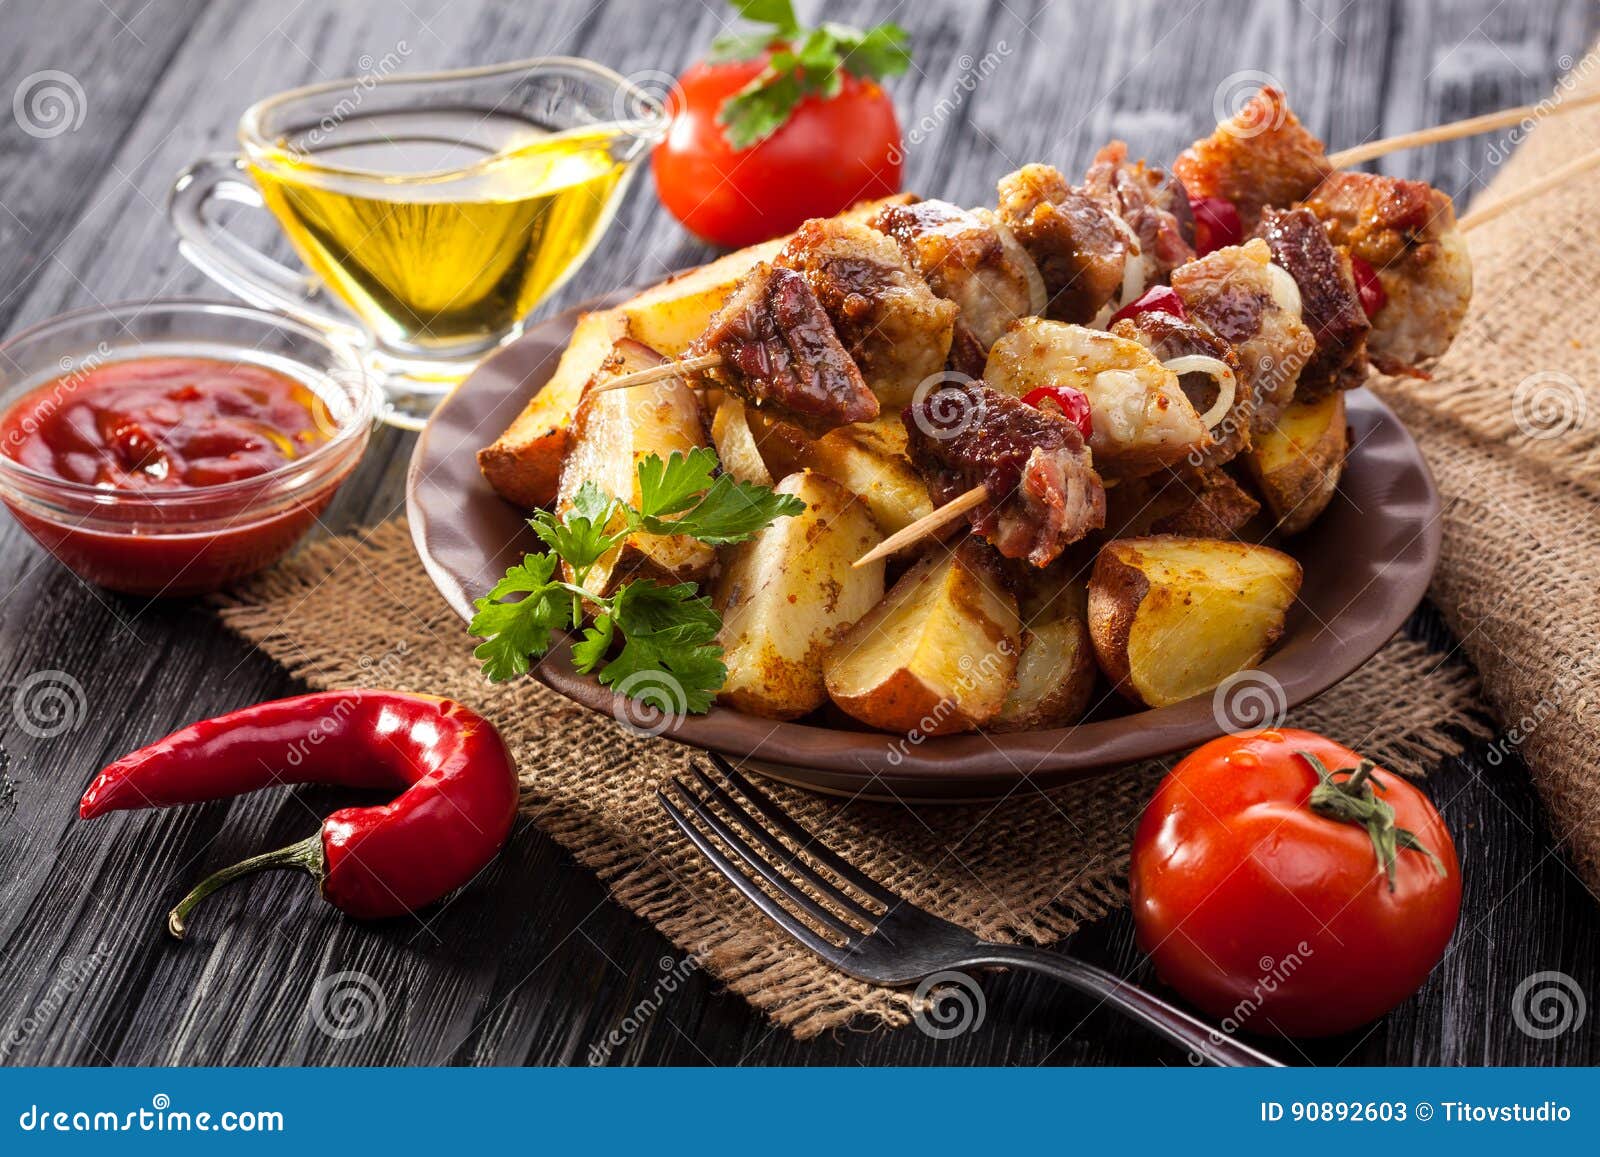 Meat Skewer with Herbs with Onions, Baked Potatoes, Tomatoes and Greens ...